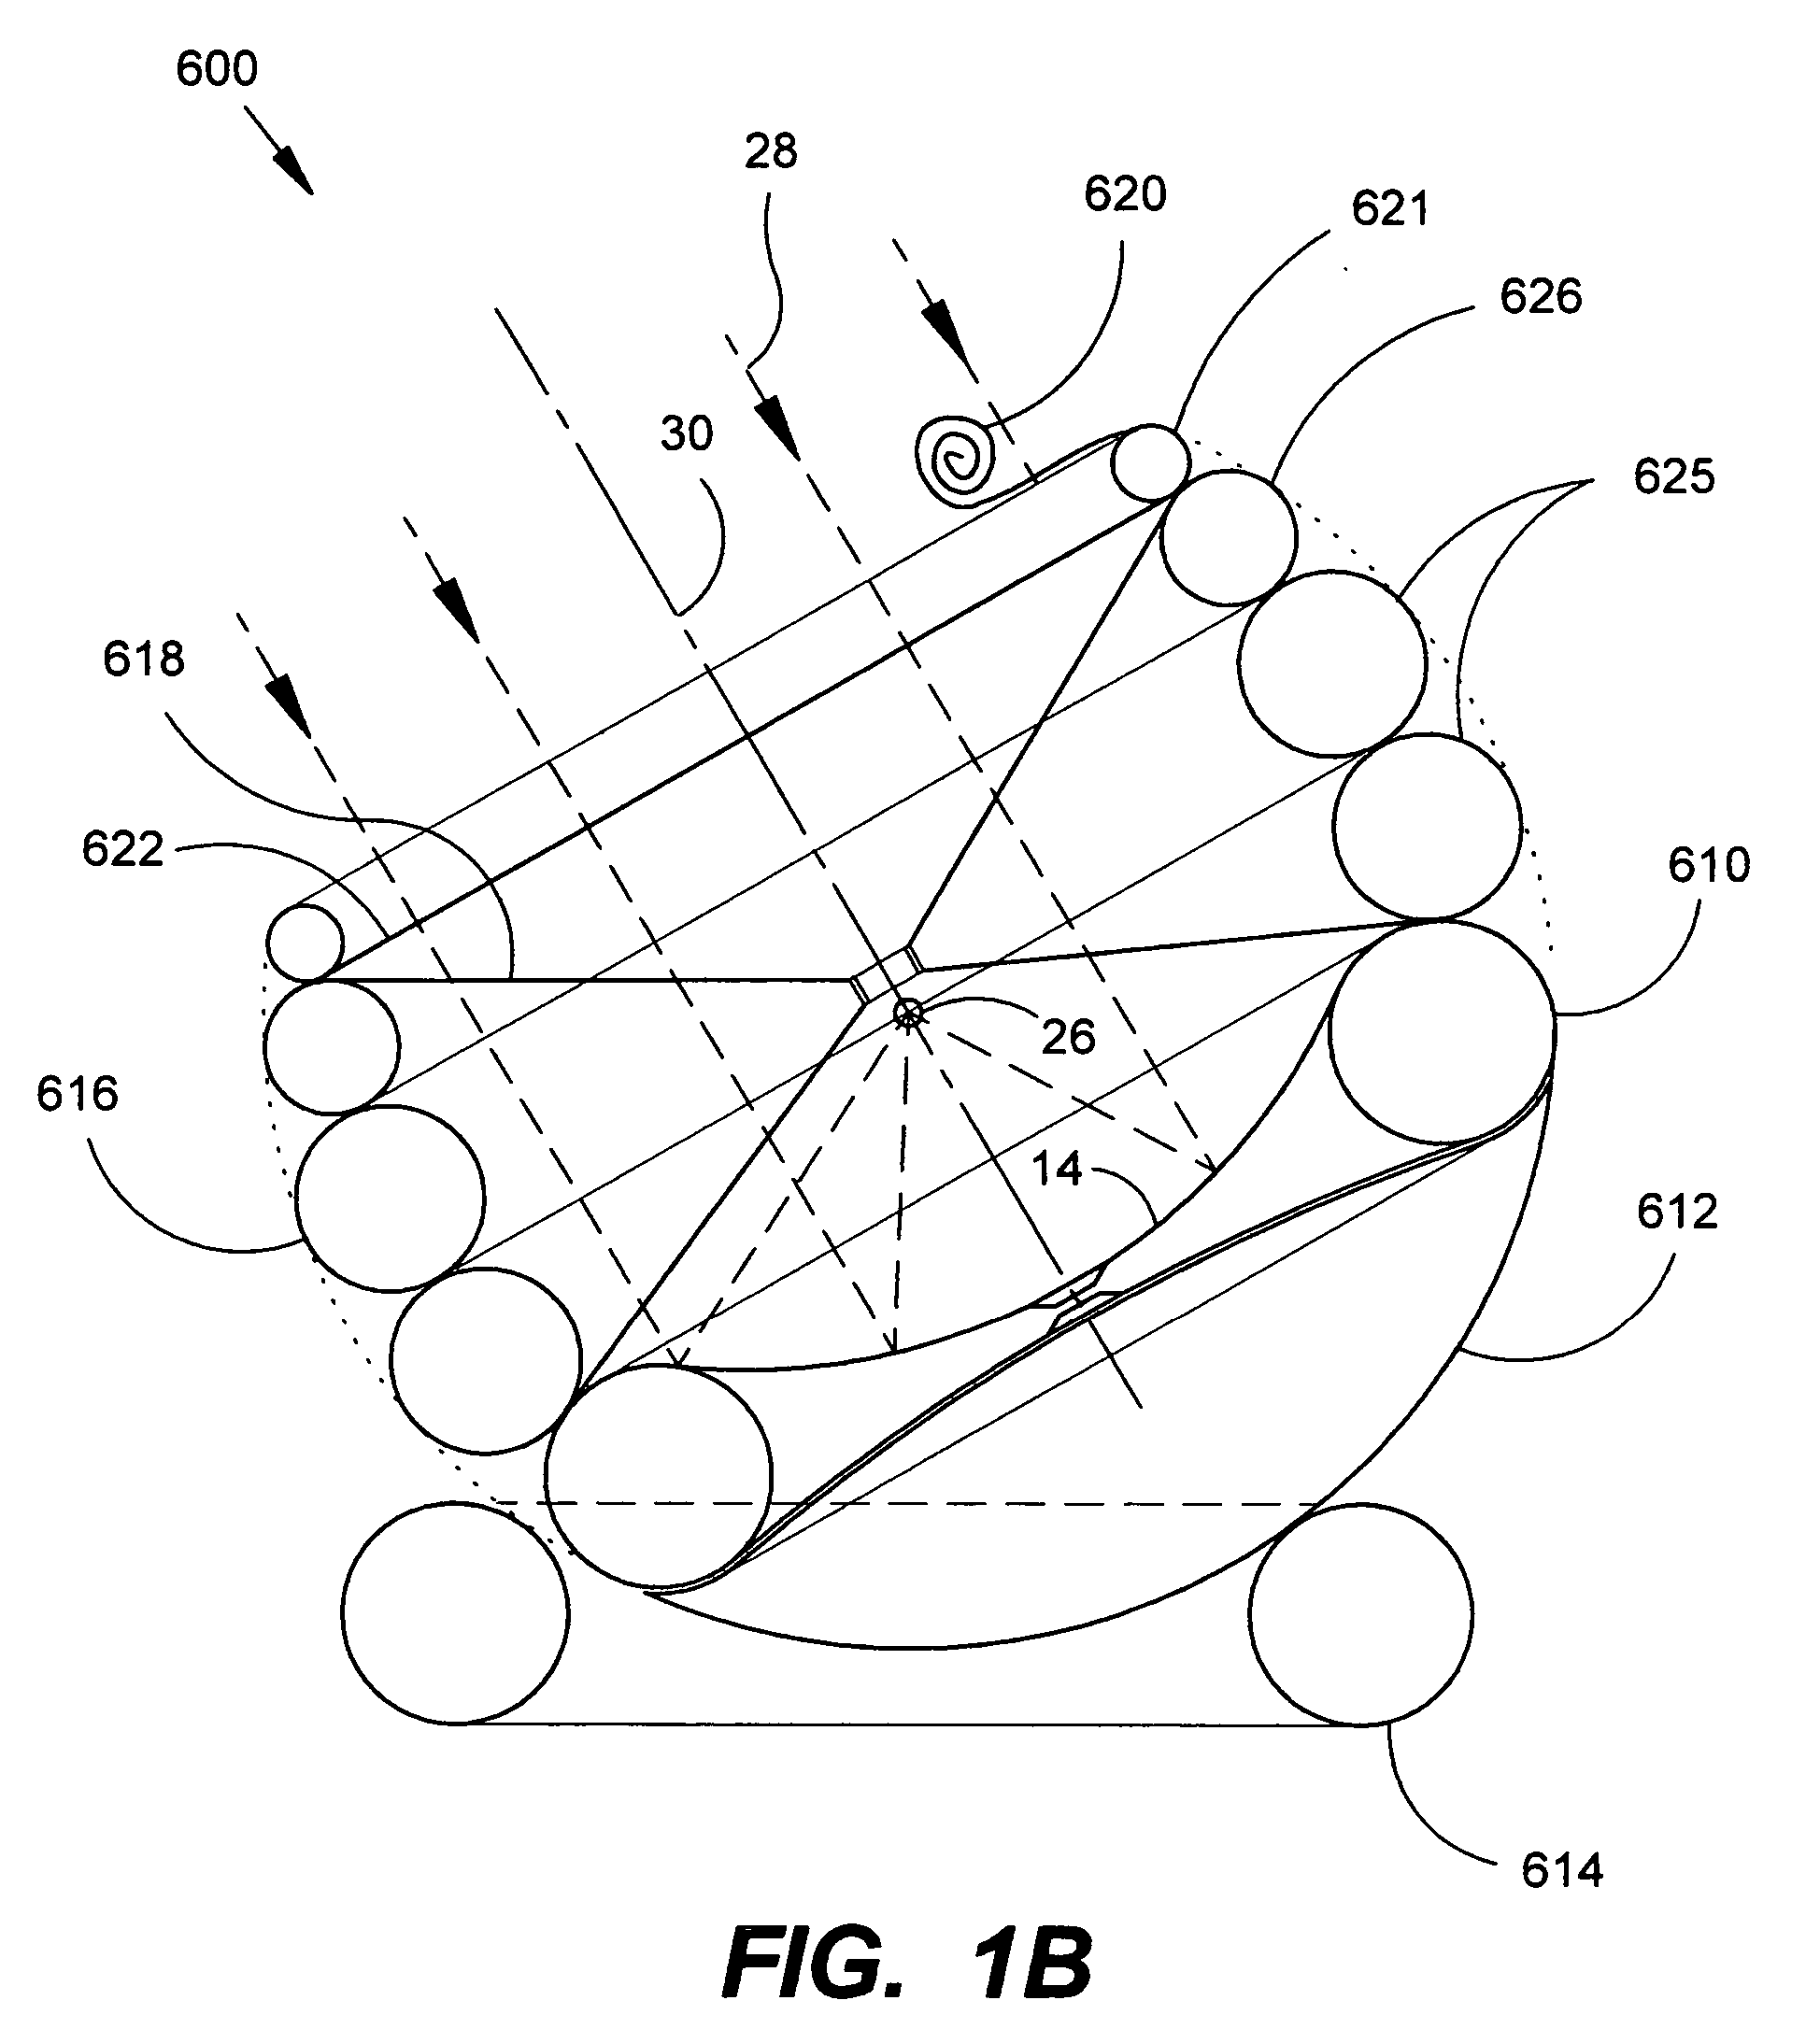 Multi-function field-deployable resource harnessing apparatus and methods of manufacture